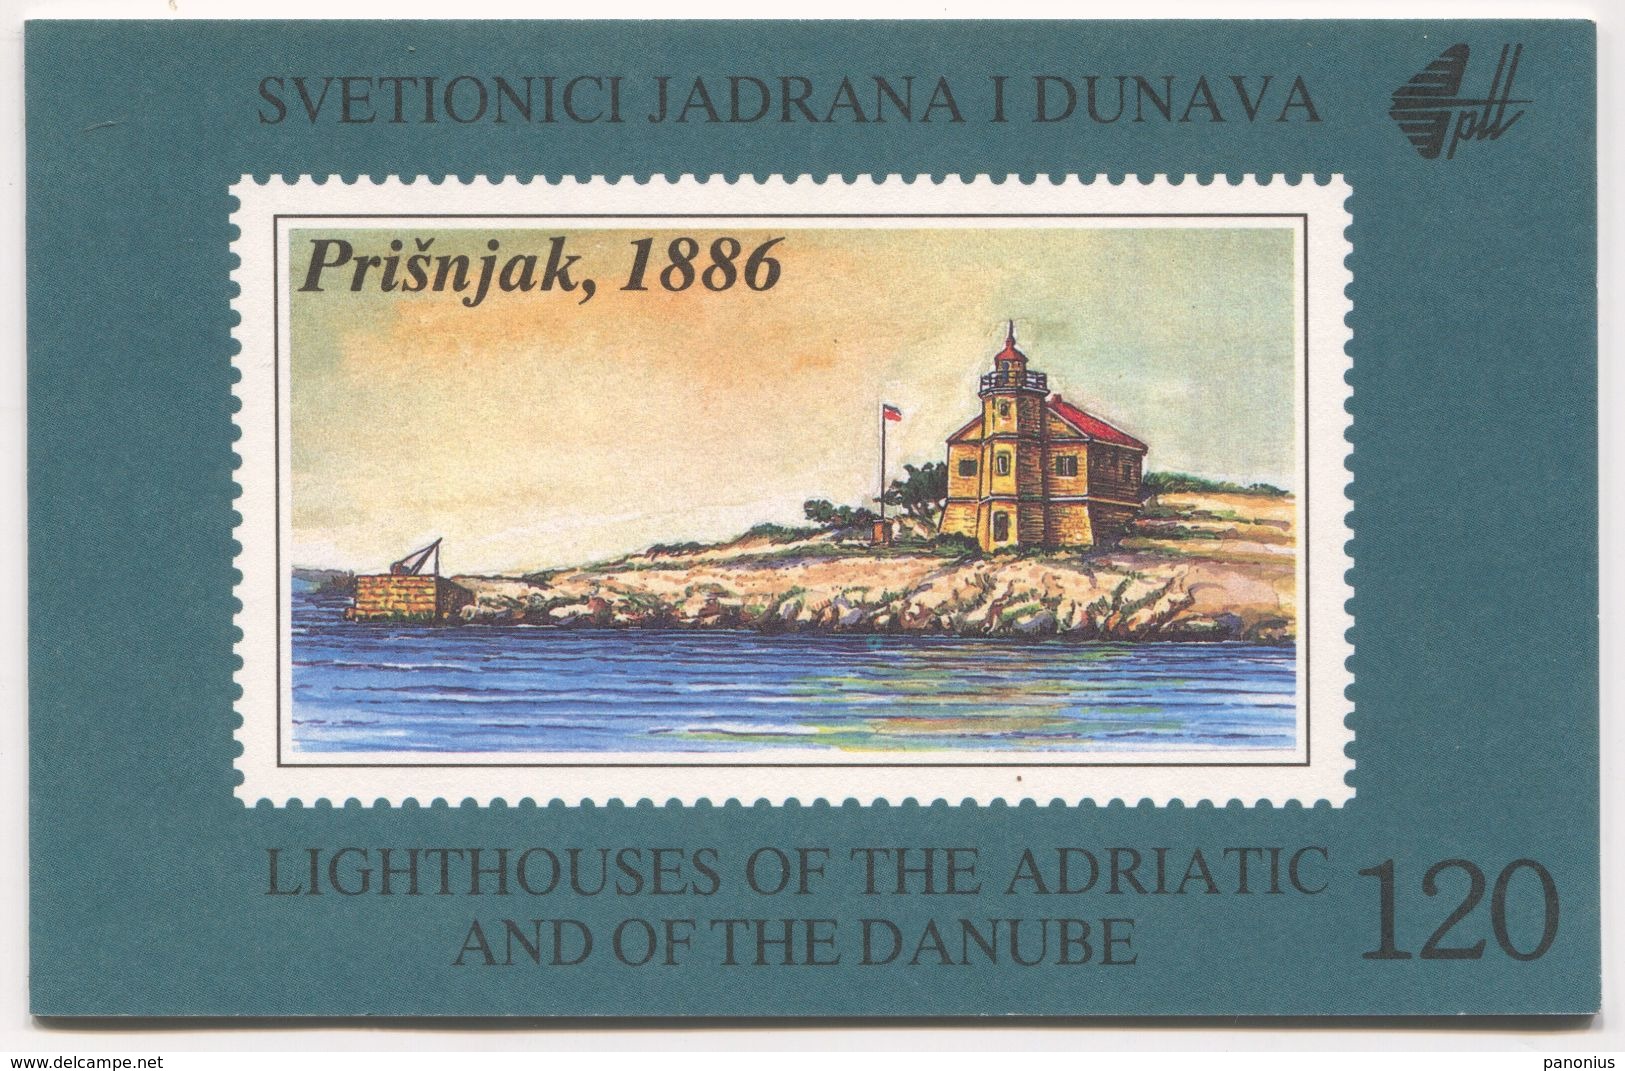 LIGHTHOUSES OF THE ADRIATIC SEA & THE DANUBE, BOOKLET YUGOSLAVIA - Carnets